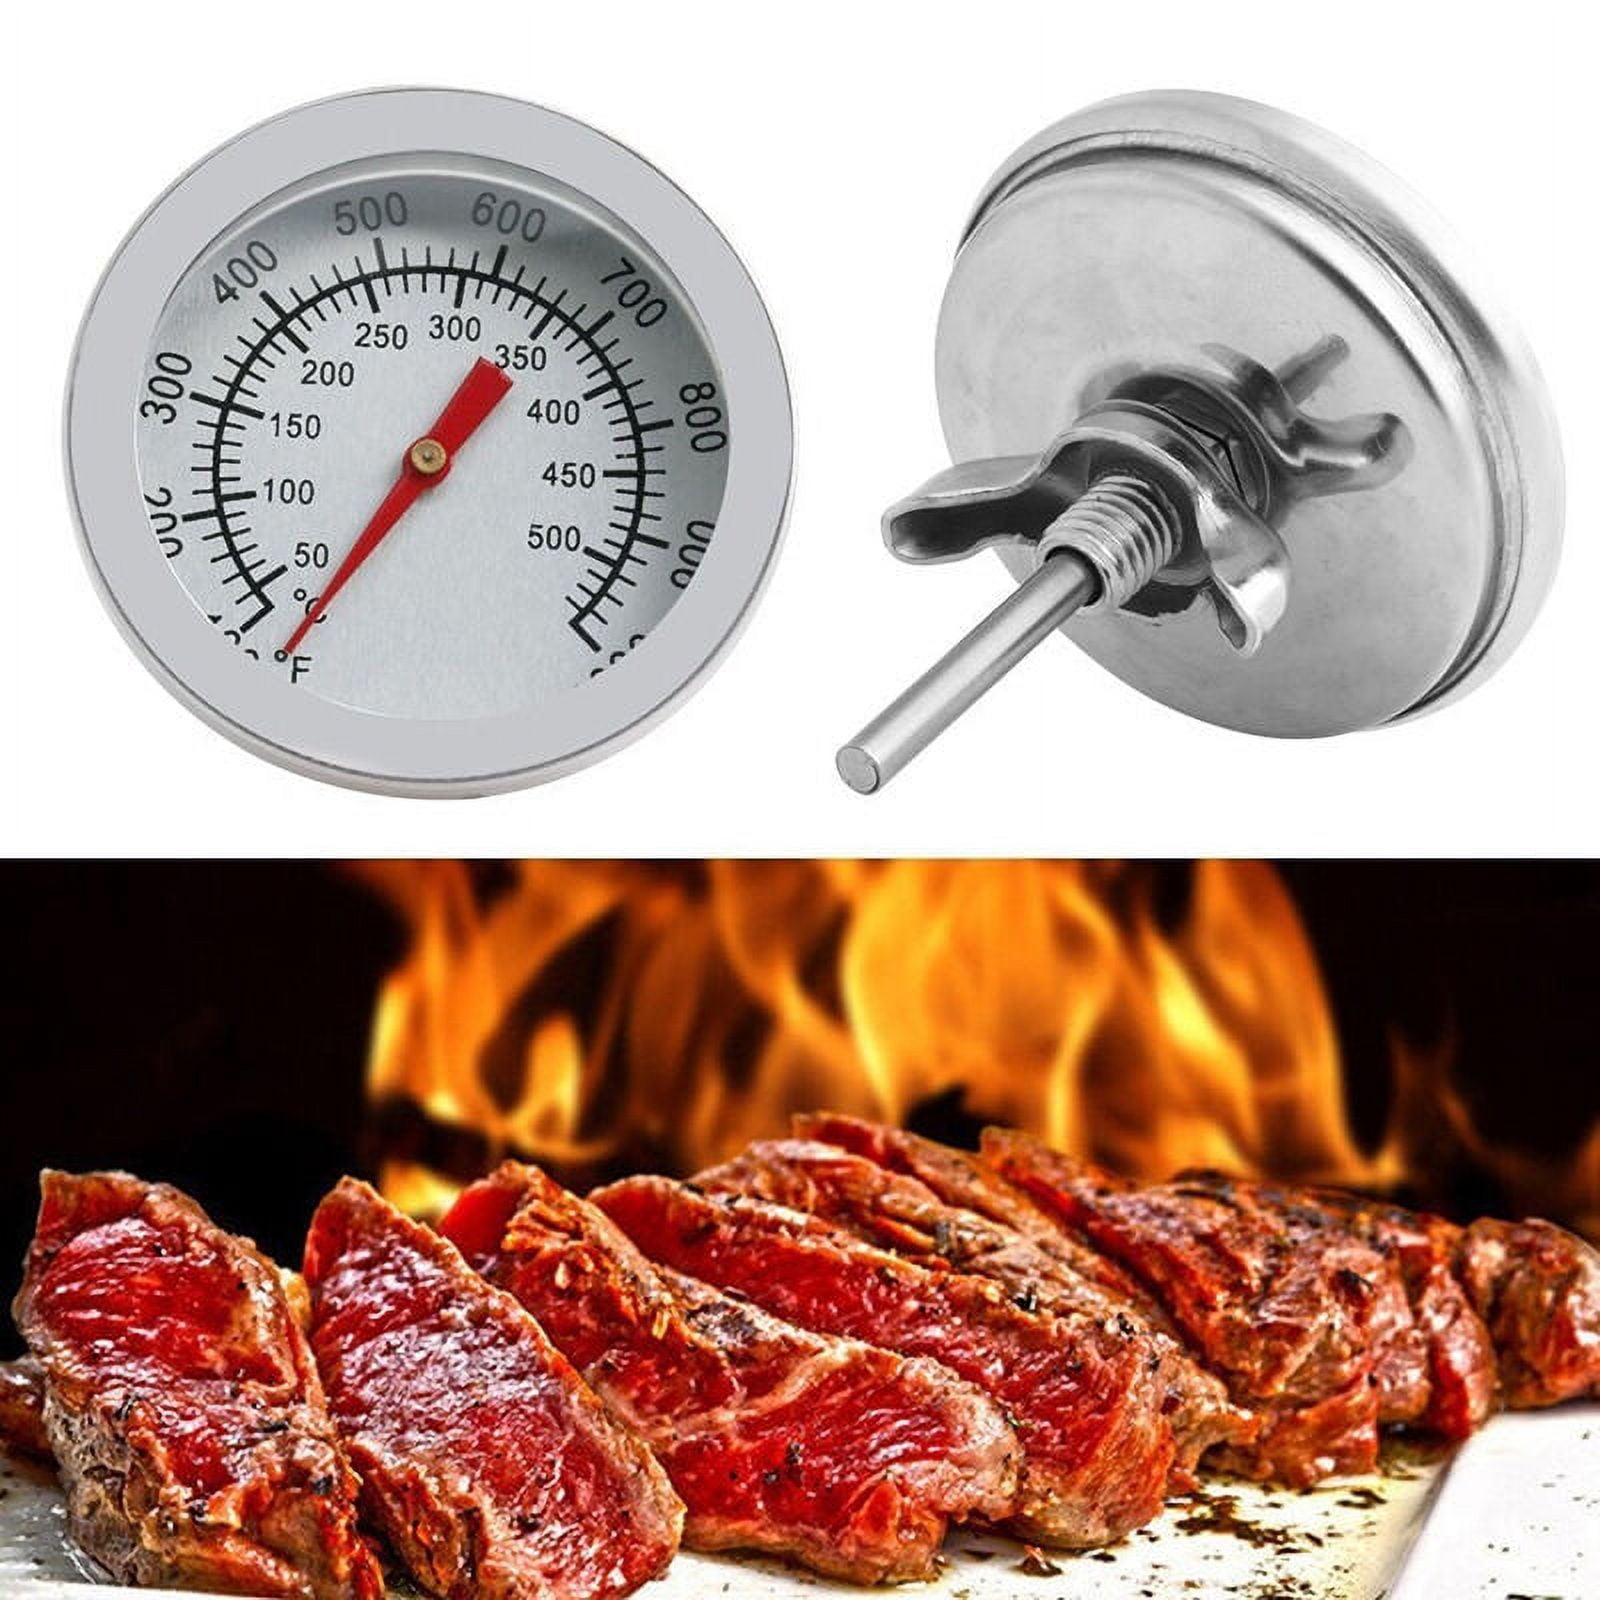 Stainless Steel BBQ Barbecue Smoker Grill Thermometer Temperature Gauge  (100 to 1000 degrees Fahrenheit) BBQ Accessories - AliExpress